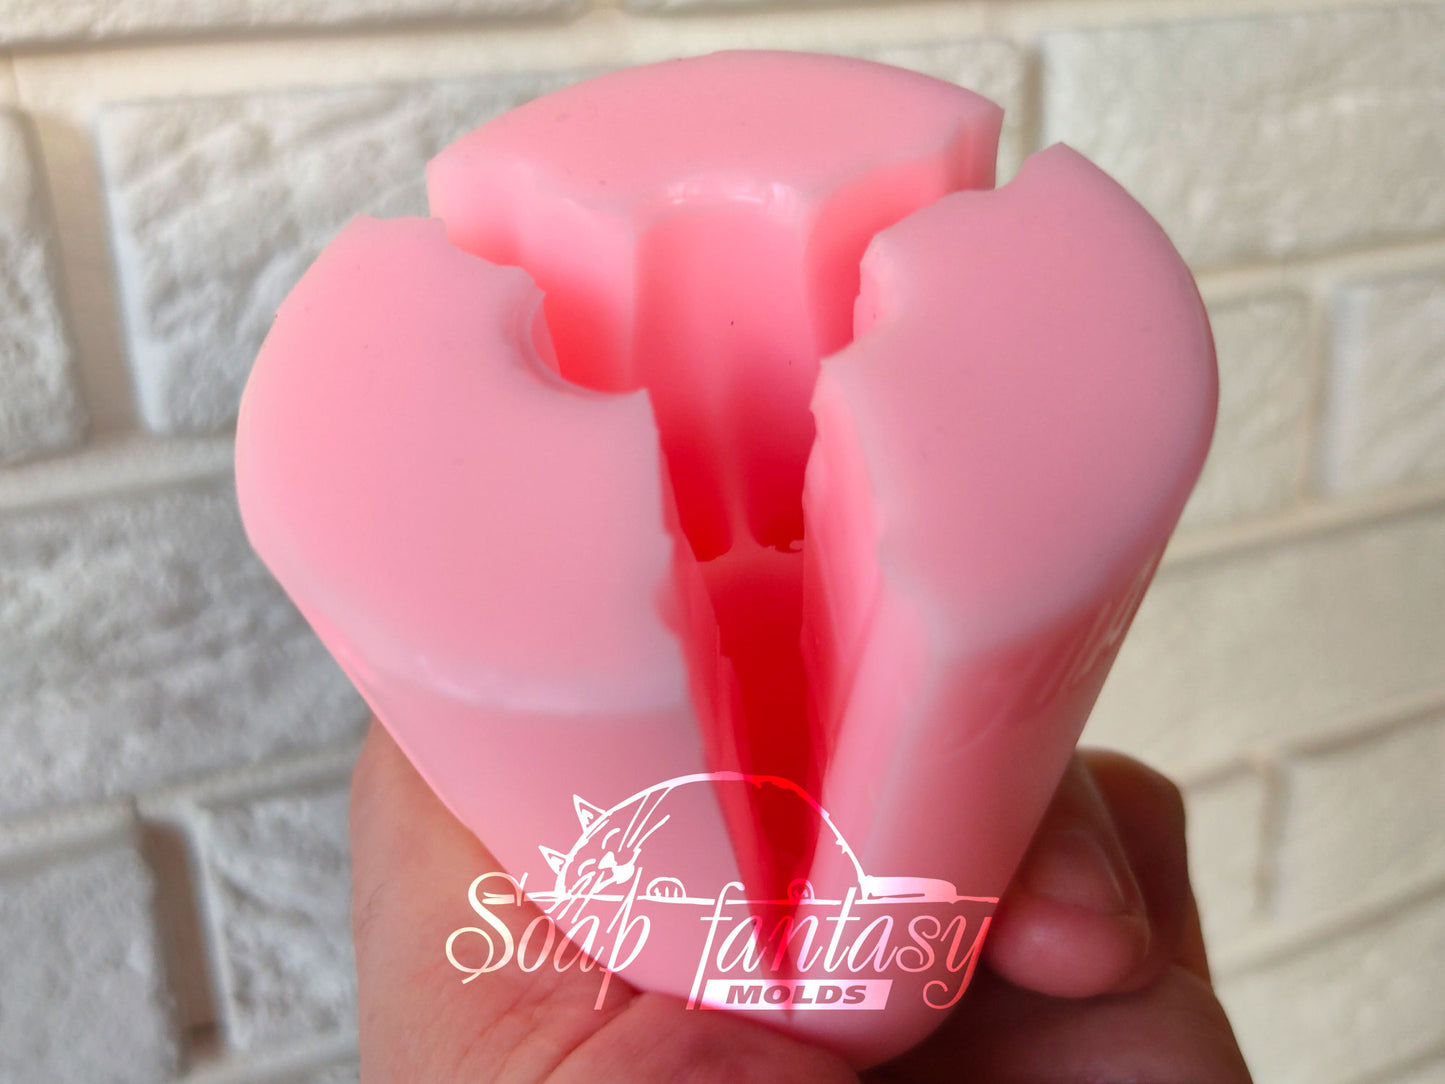 Alstroemeria lily 3 buds silicone mold for soap making